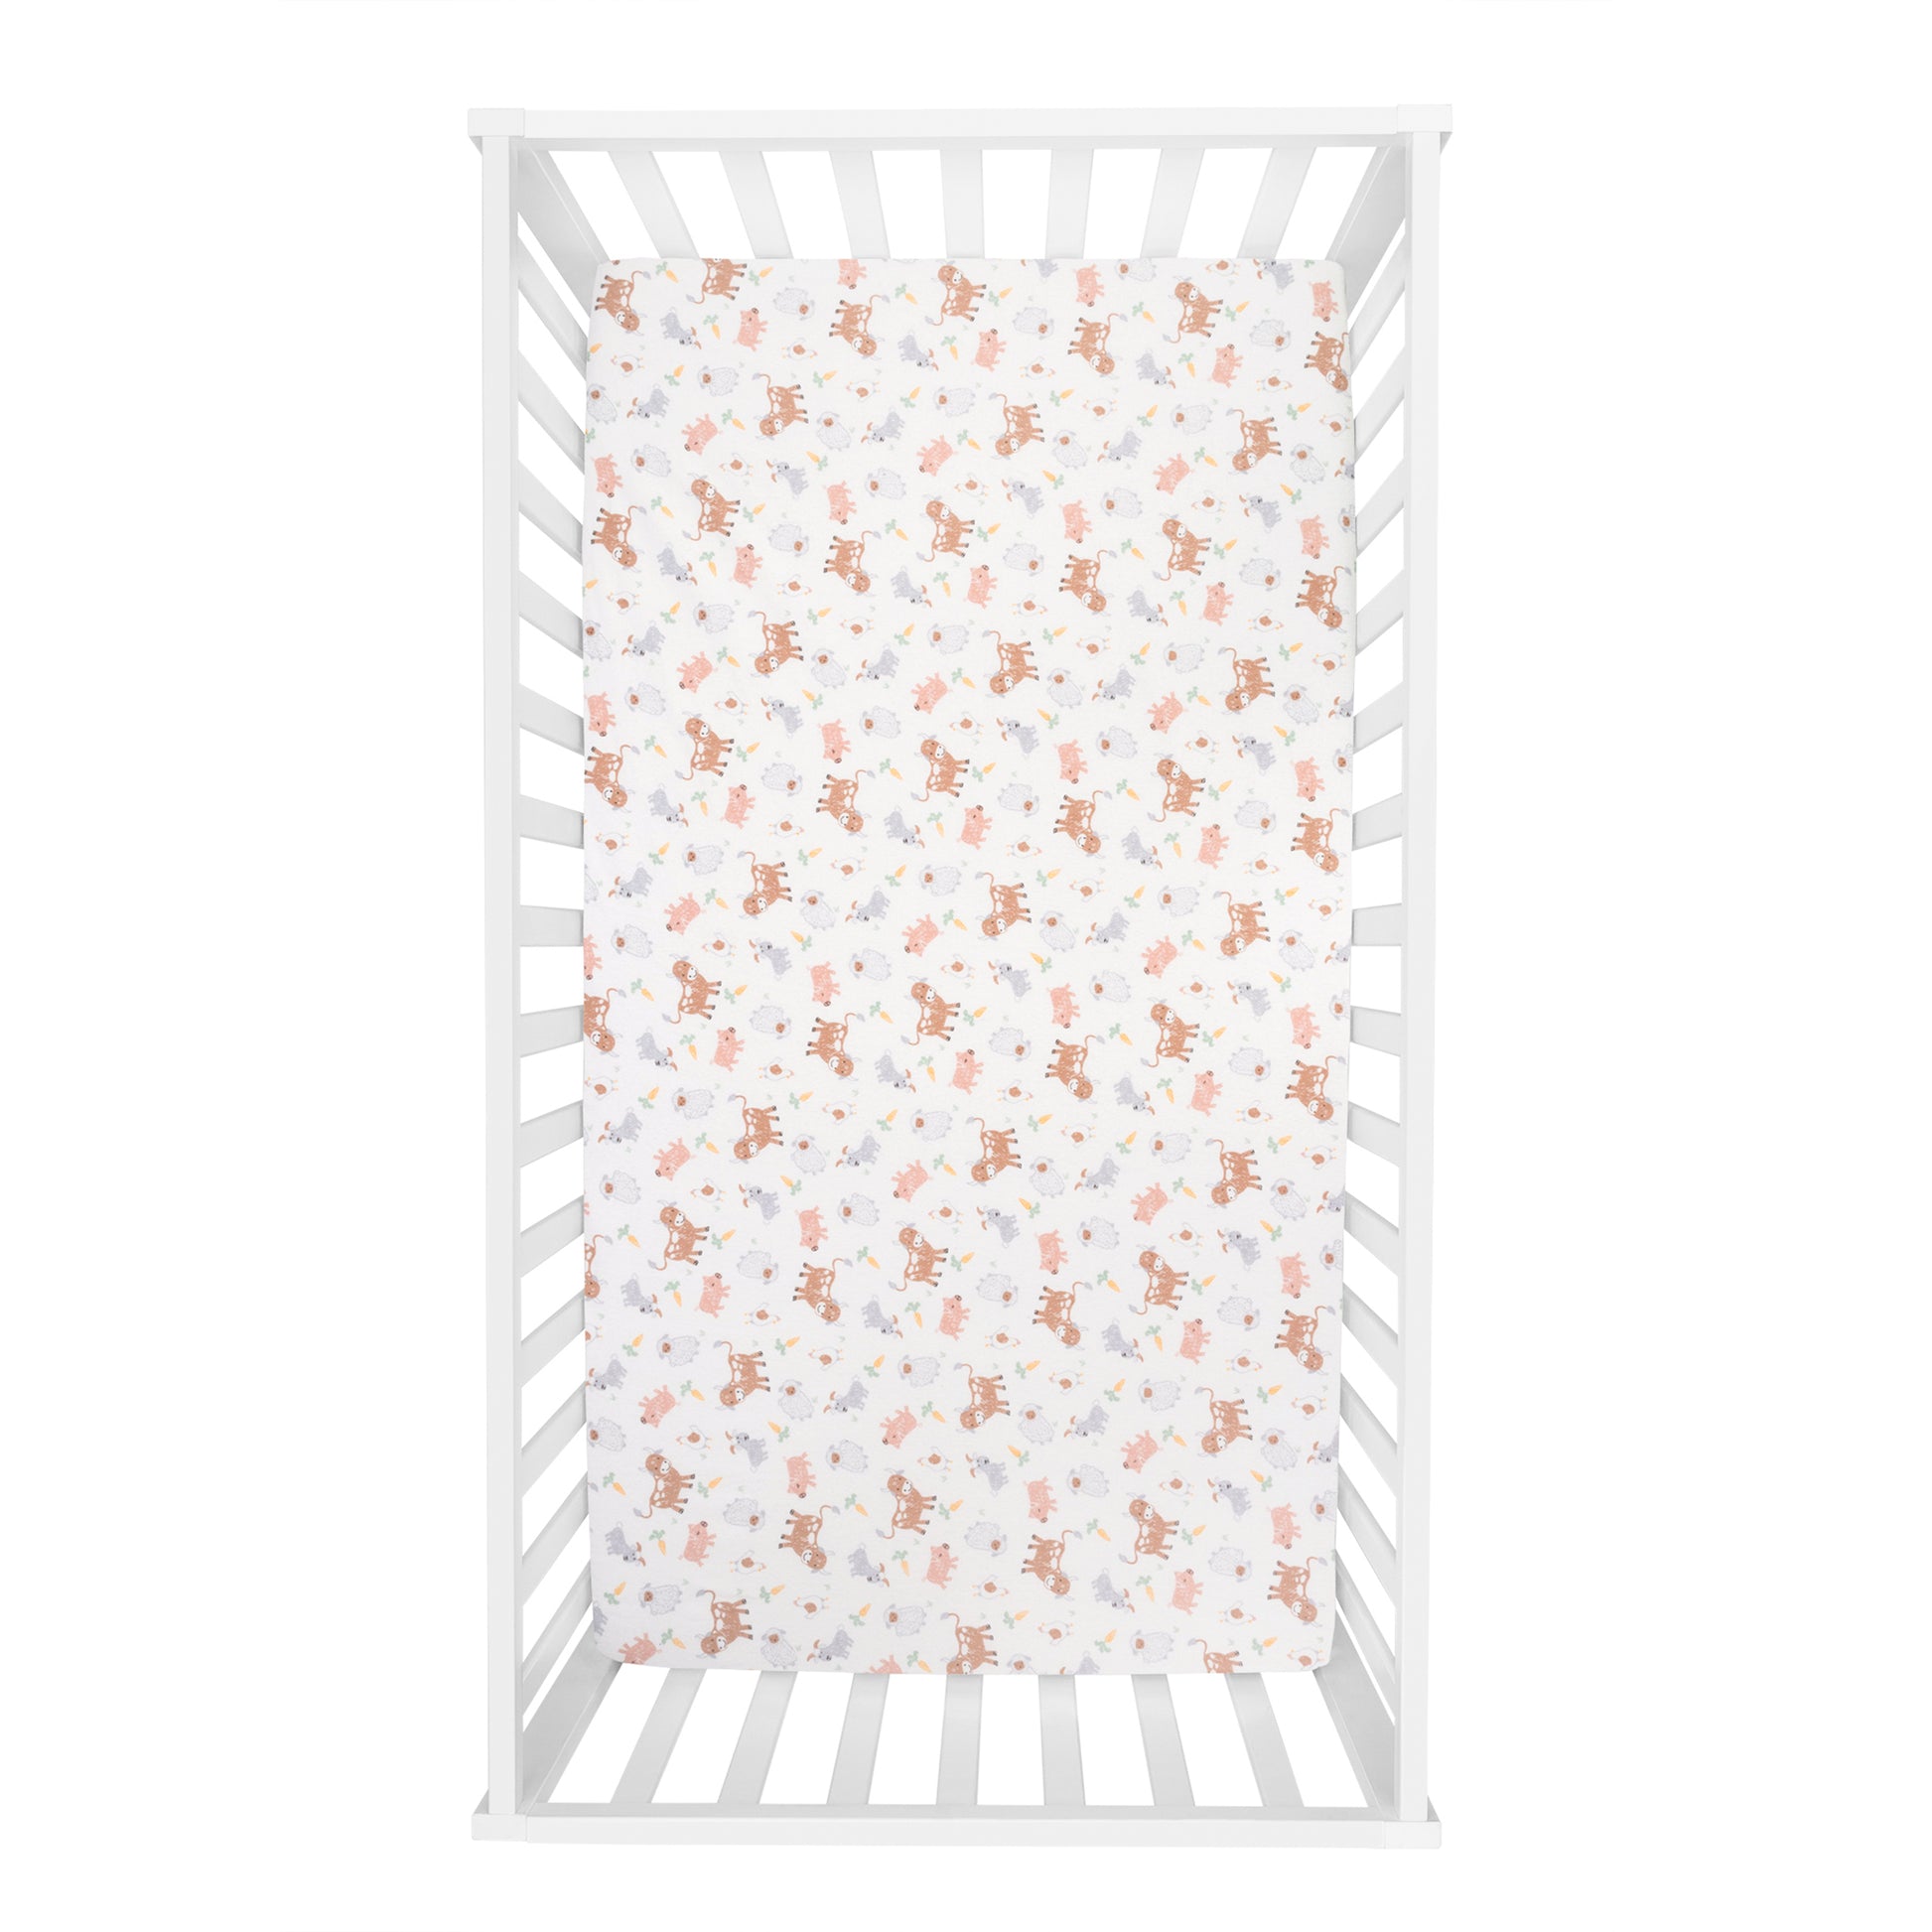  Farm Friends Deluxe Flannel Fitted Crib Sheet -overhead view